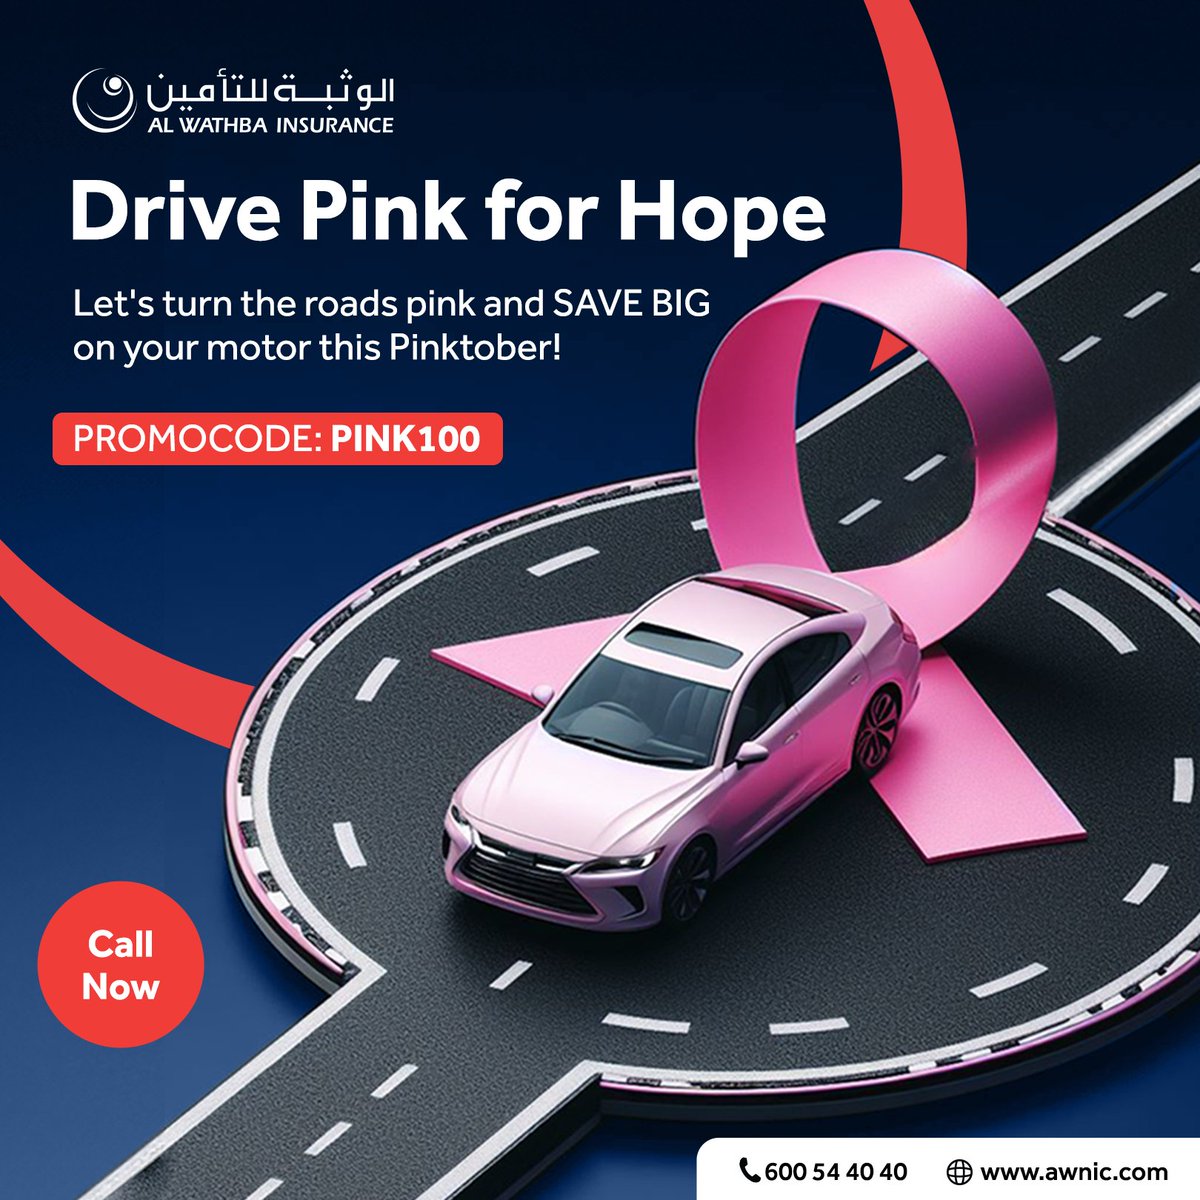 🎀 Turn the road pink this #Pinktober and SAVE AED 100 on your motor insurance! 🚗💖 Call now at 600 544040 to claim your discount or add code PINK100 when getting a quote here: awnic.co/motor 🌸

#PinkRoads #DriveForChange #SaveWithPurpose 🎉